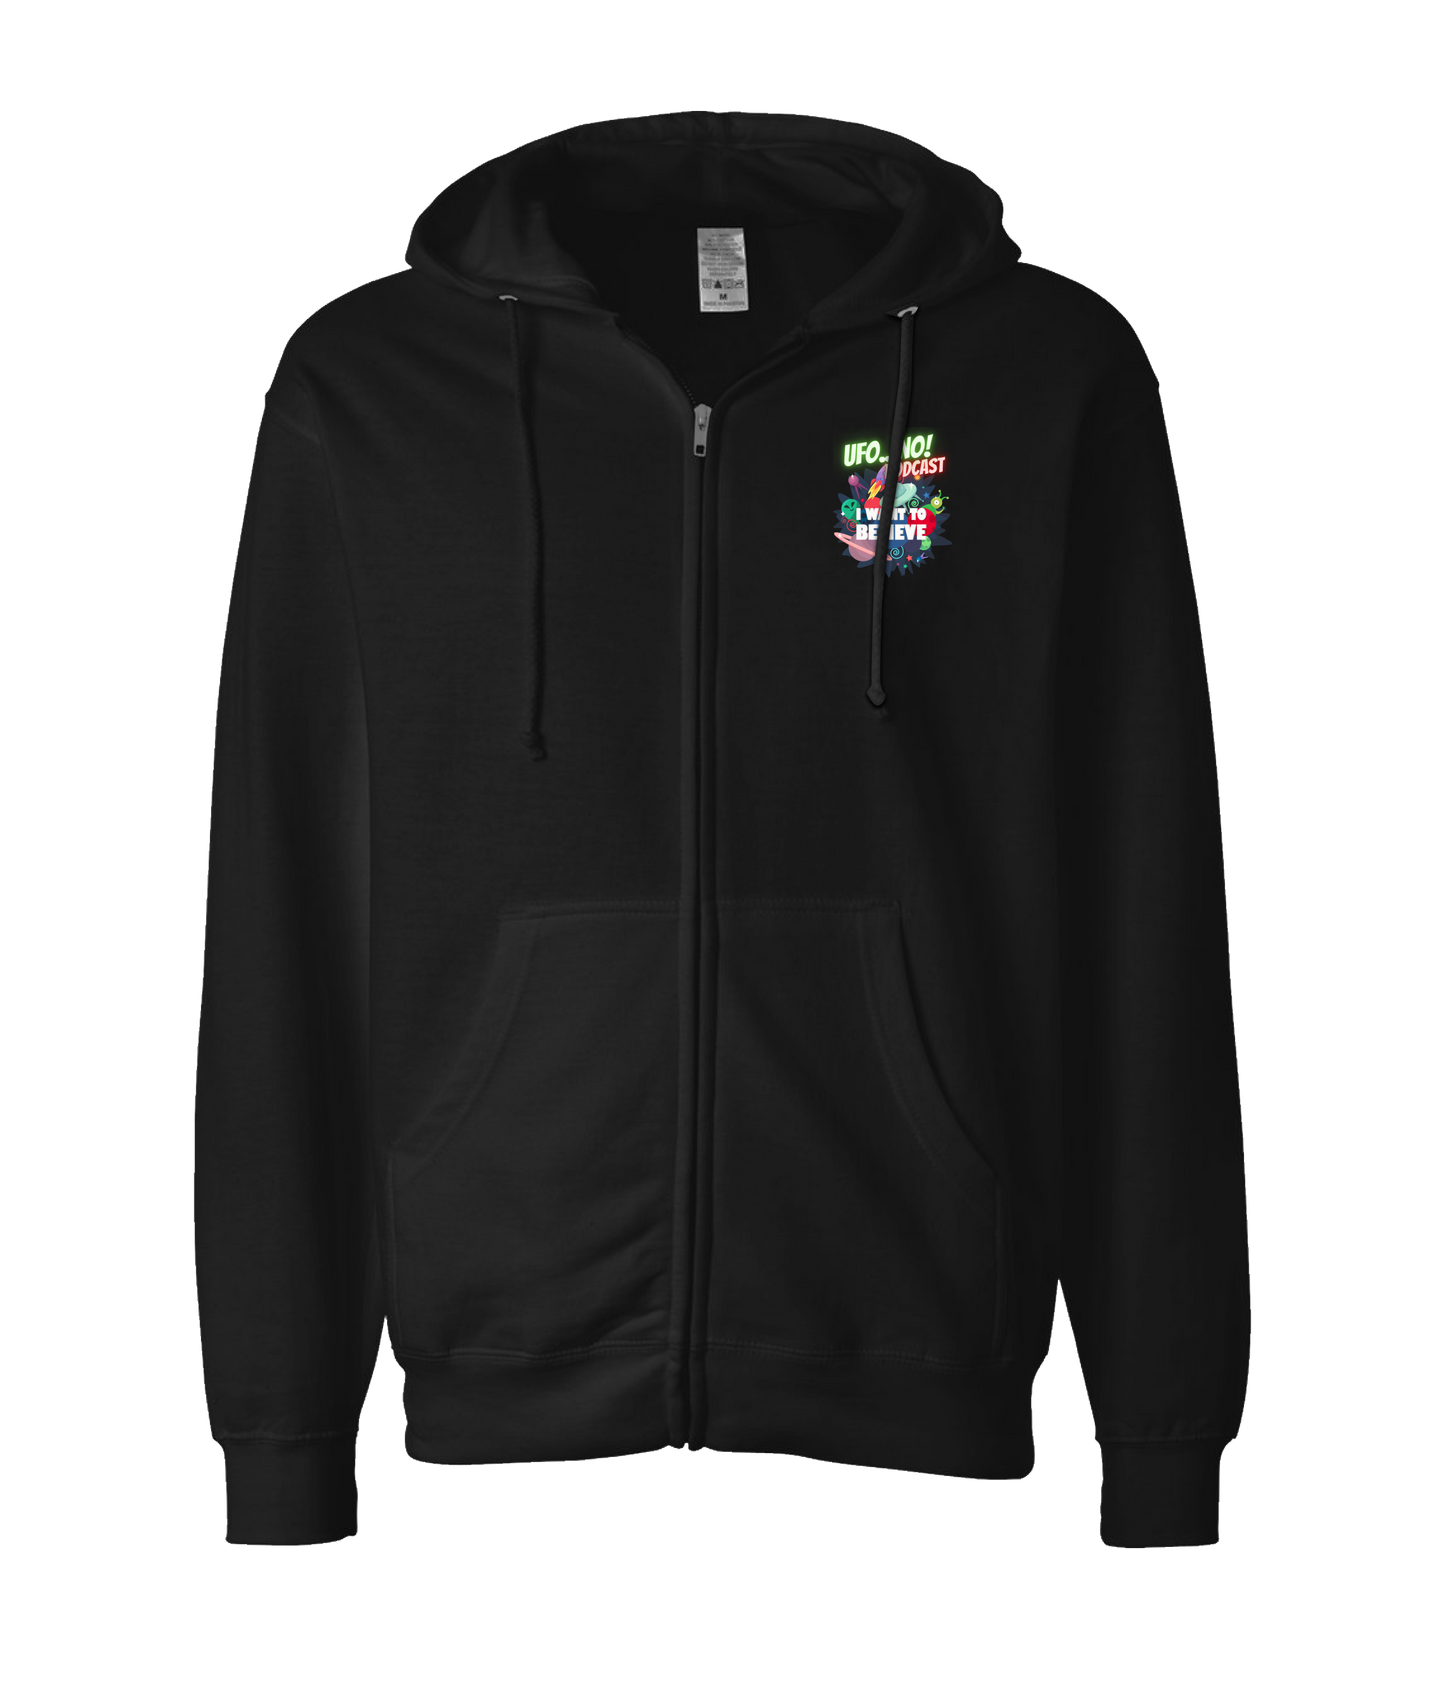 UFO...No! Podcast - I Want To Believe - Black Zip Up Hoodie